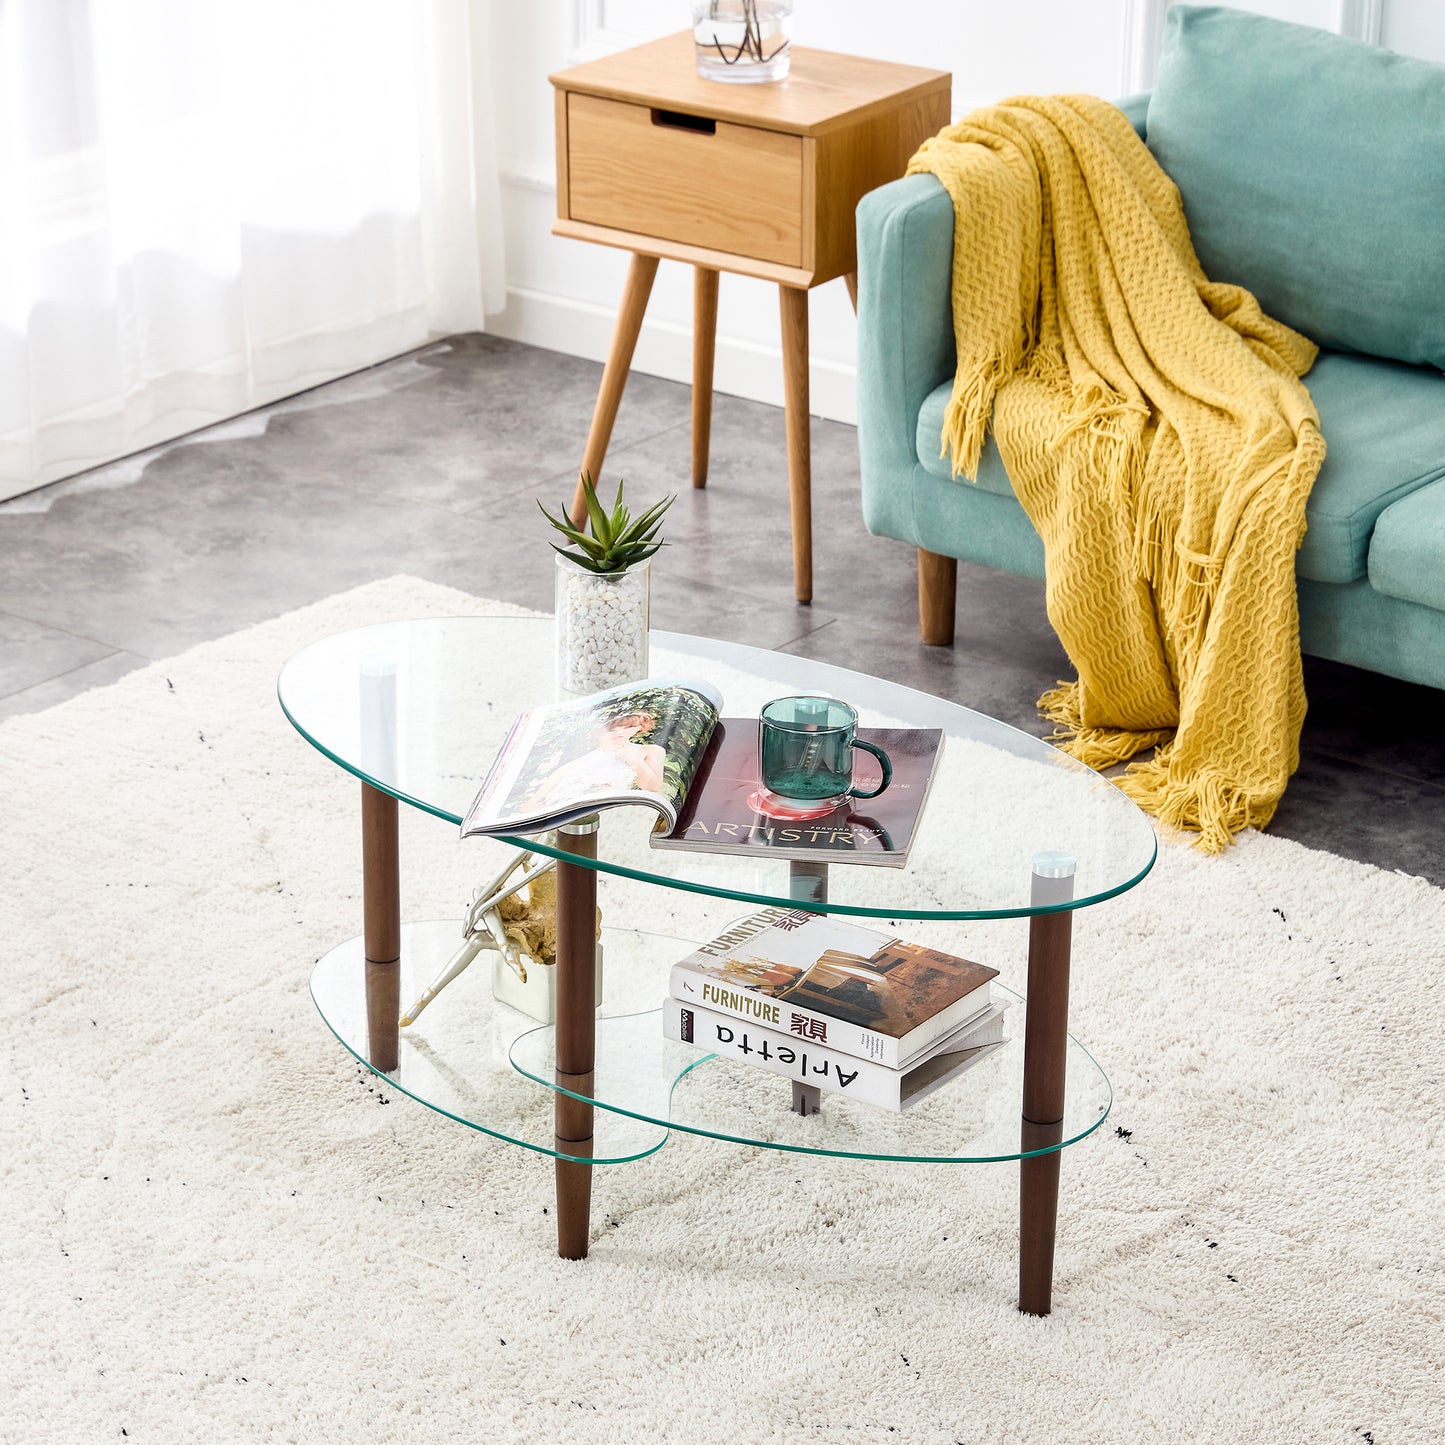 Elegant Transparent Oval Glass Coffee Table with Oak Wood Legs